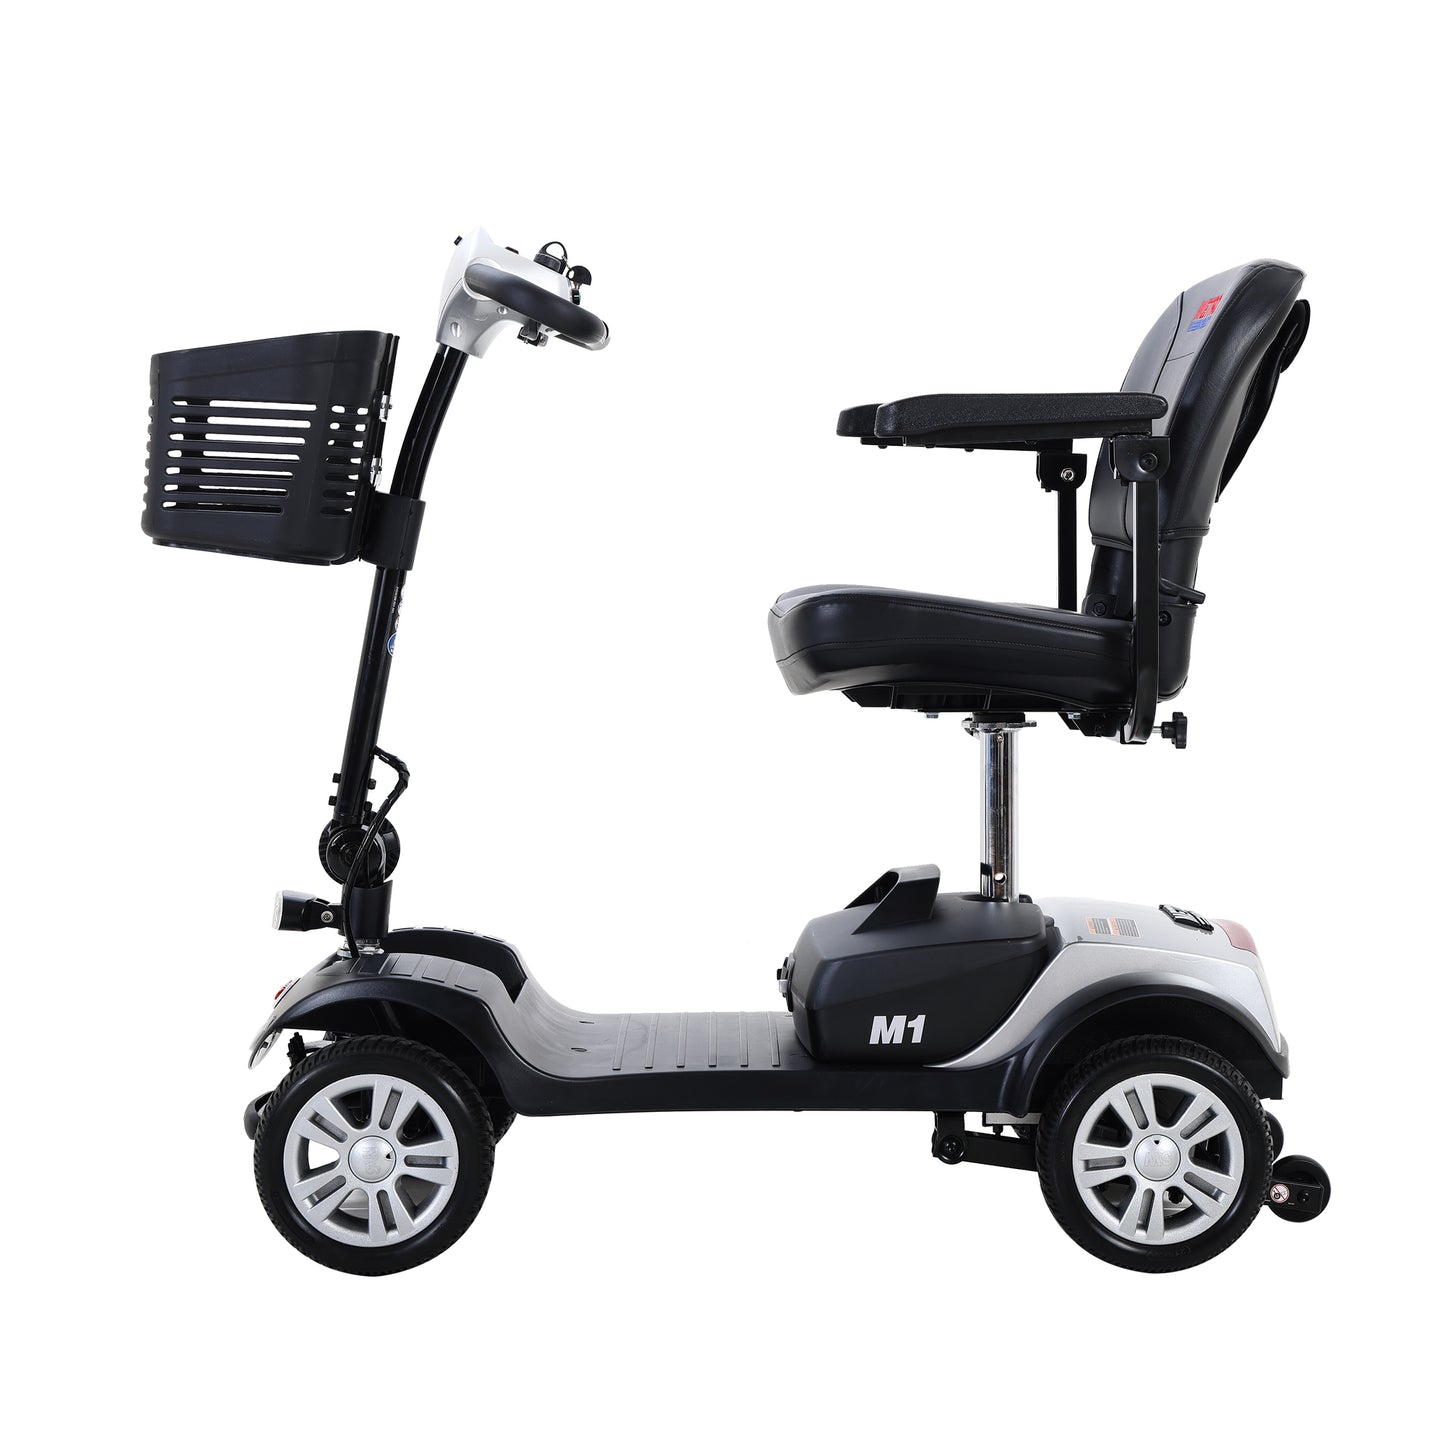 Four wheels Compact Travel Mobility Scooter with 300W Motor for Adult-300lbs,  SILVER